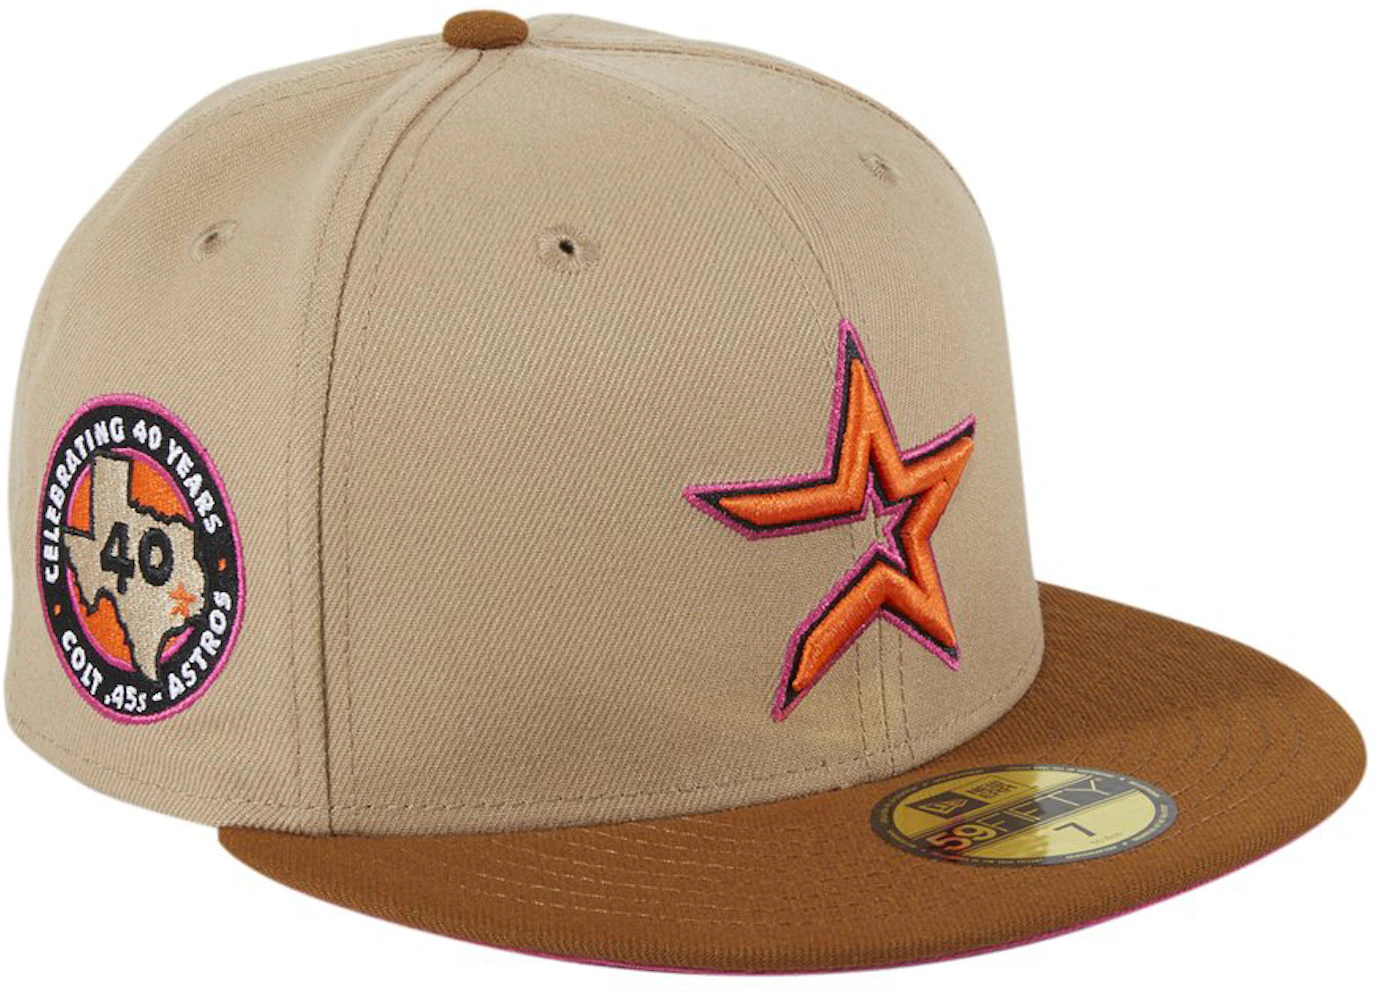 HAT CLUB HOUSTON ASTROS COLT 45S BEER PACK 40 YEARS